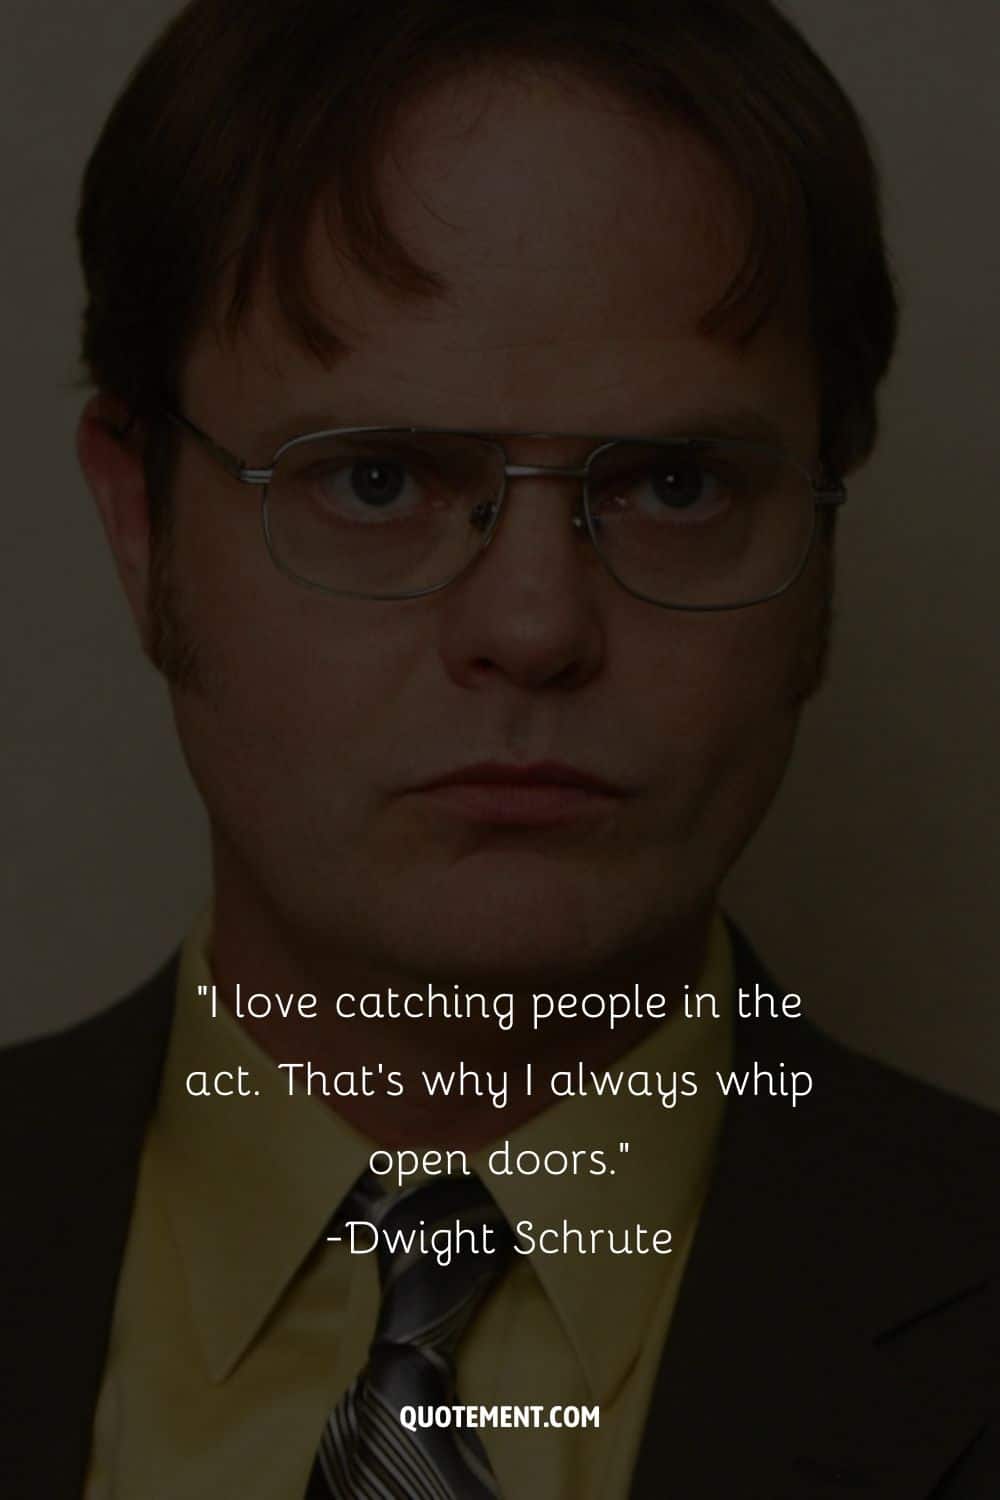 I love catching people in the act. That's why I always whip open doors